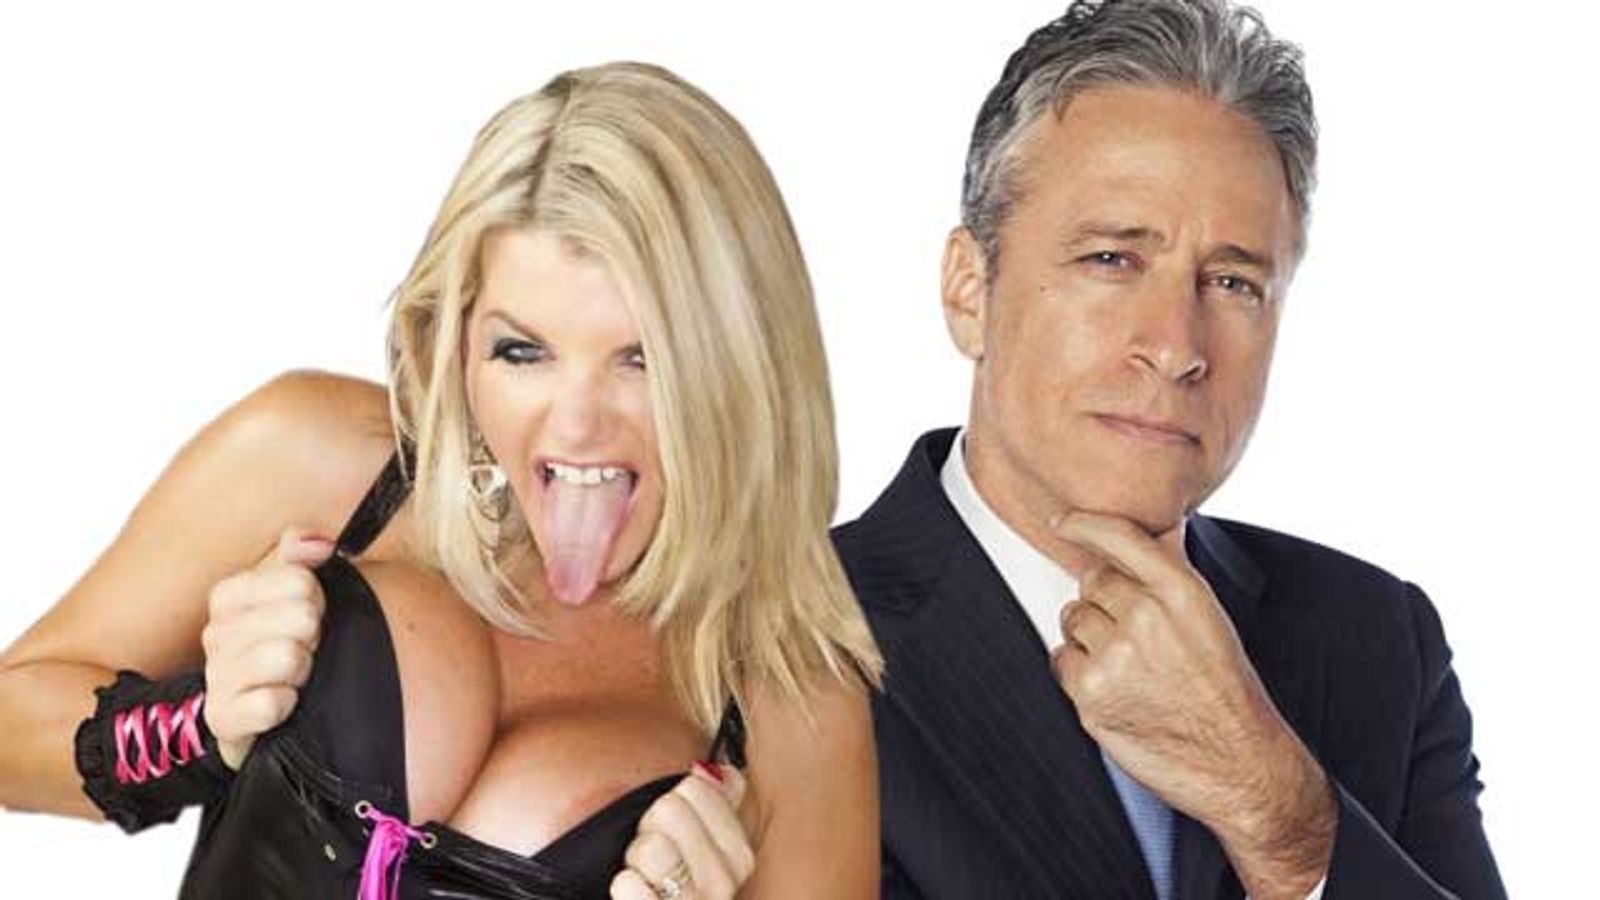 Vicky Vette Gets Special Monologue Mention From Jon Stewart